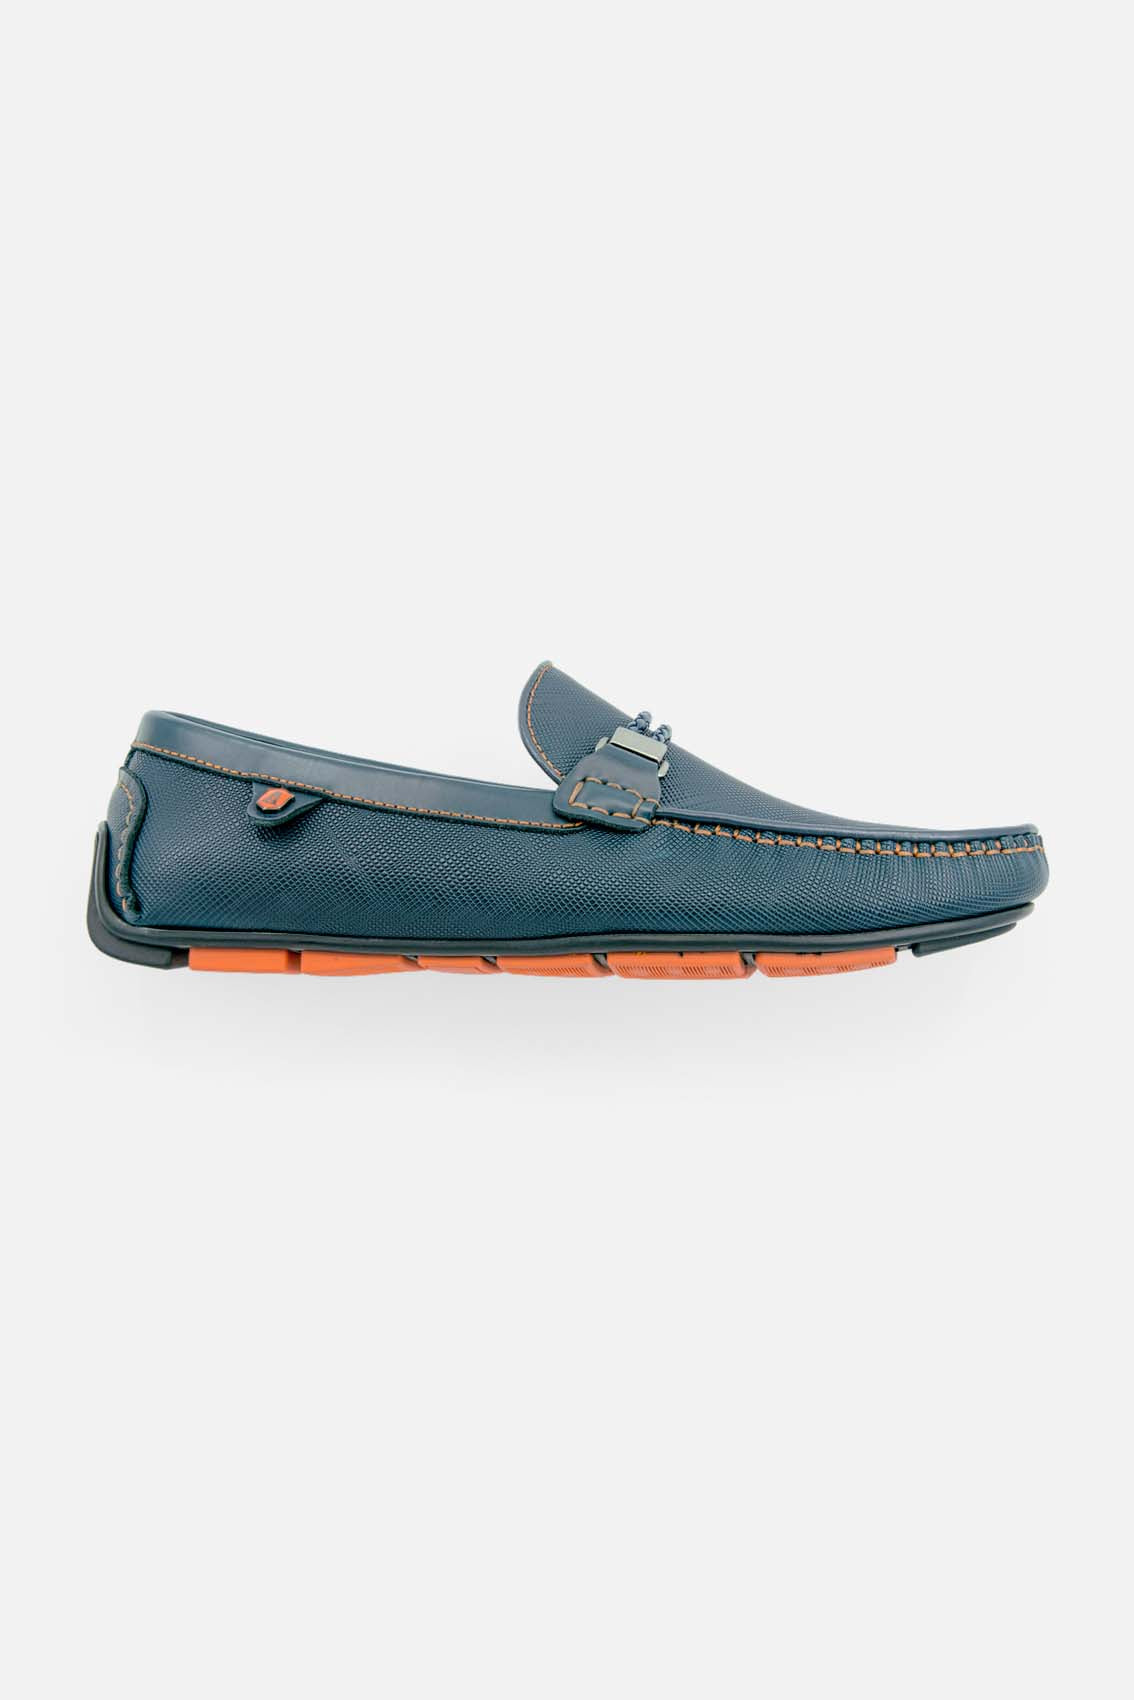 Men's moccasins made of leather with closed sole